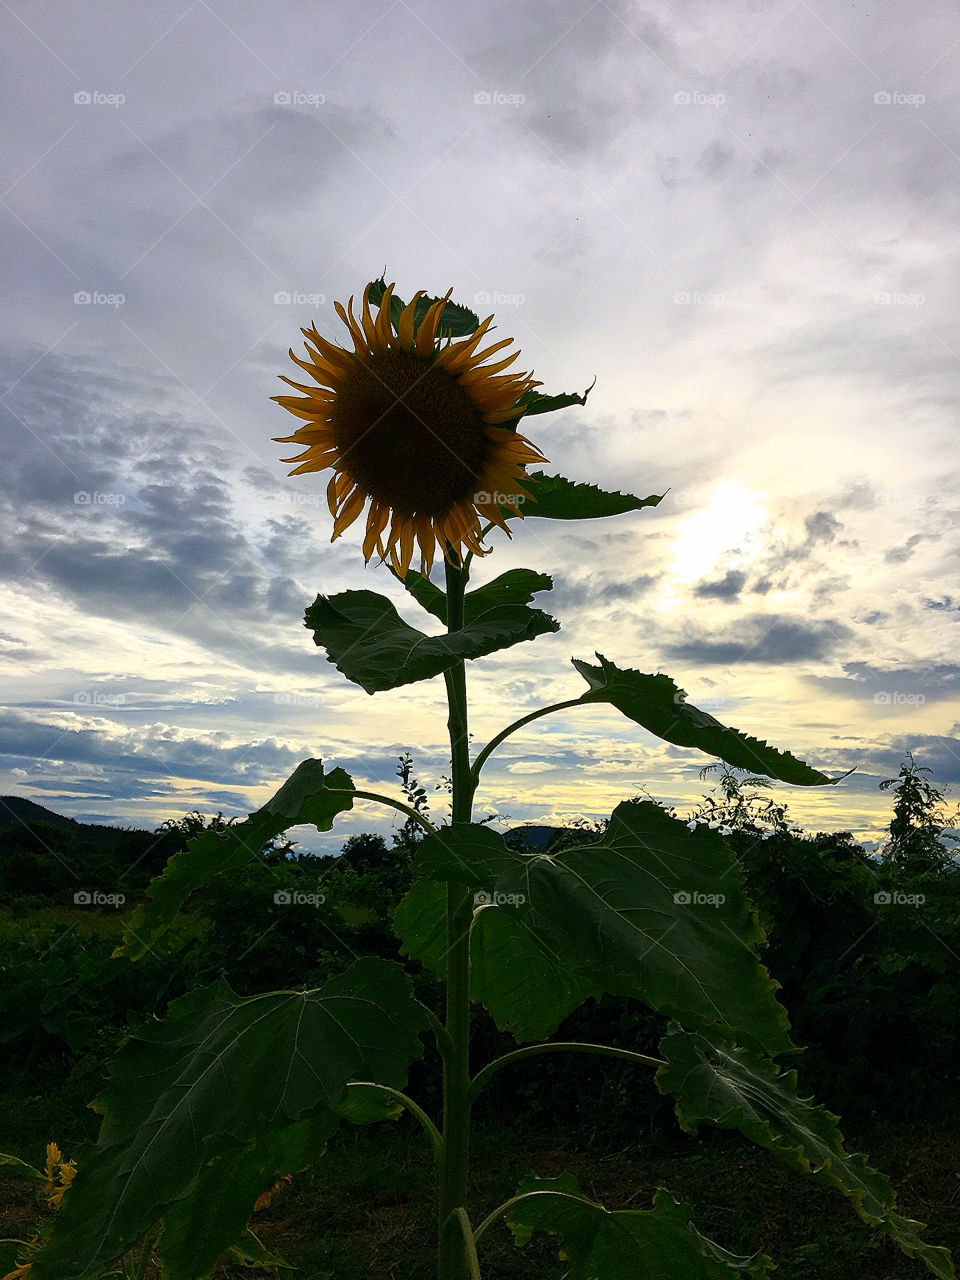 When Sunflower say goodbye to the sun